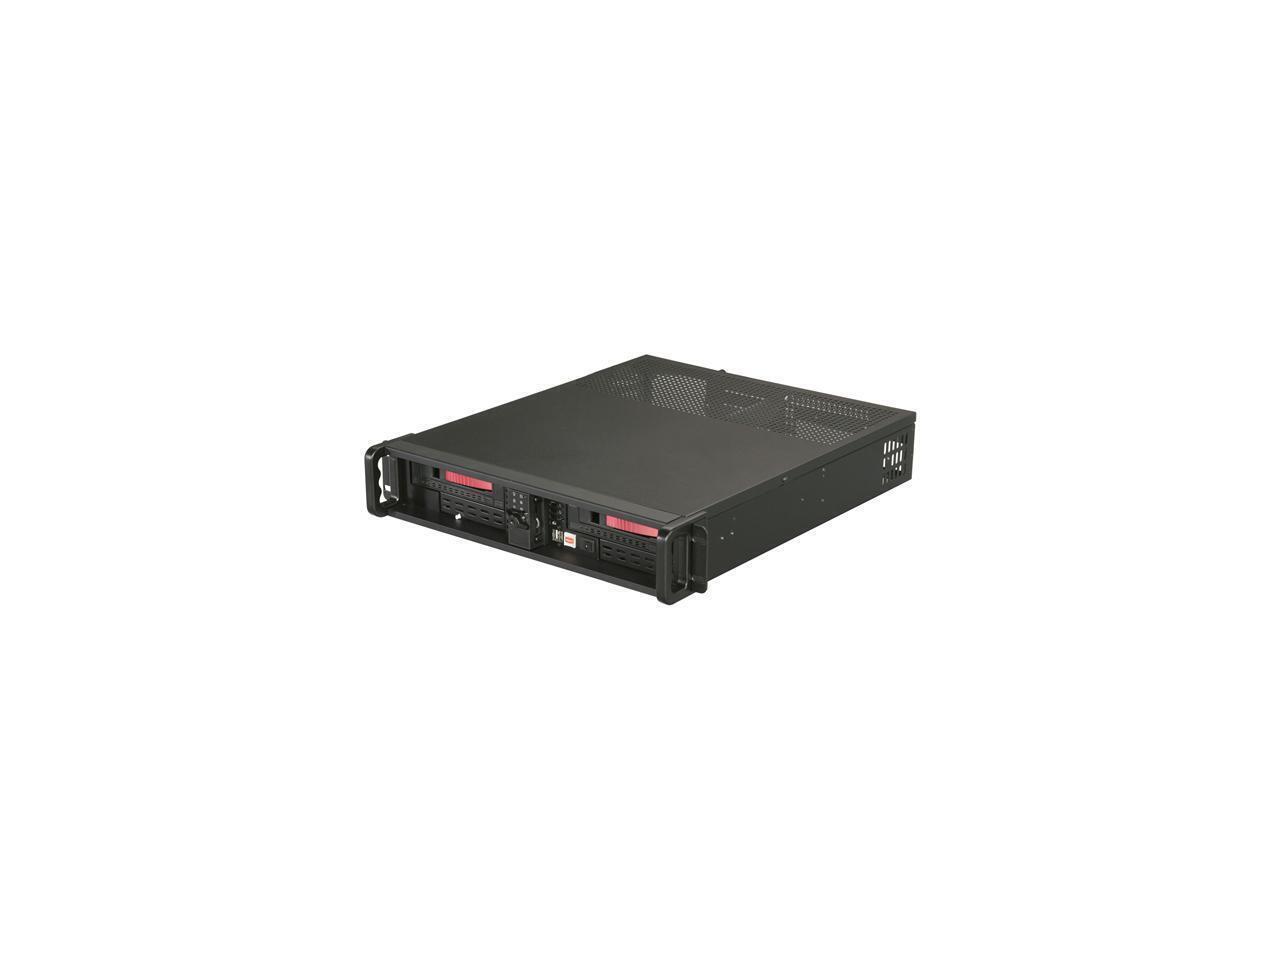 iStarUSA D200ND-2T7SA-RD Red Steel 2U Rackmount Compact Stylish Server Case with